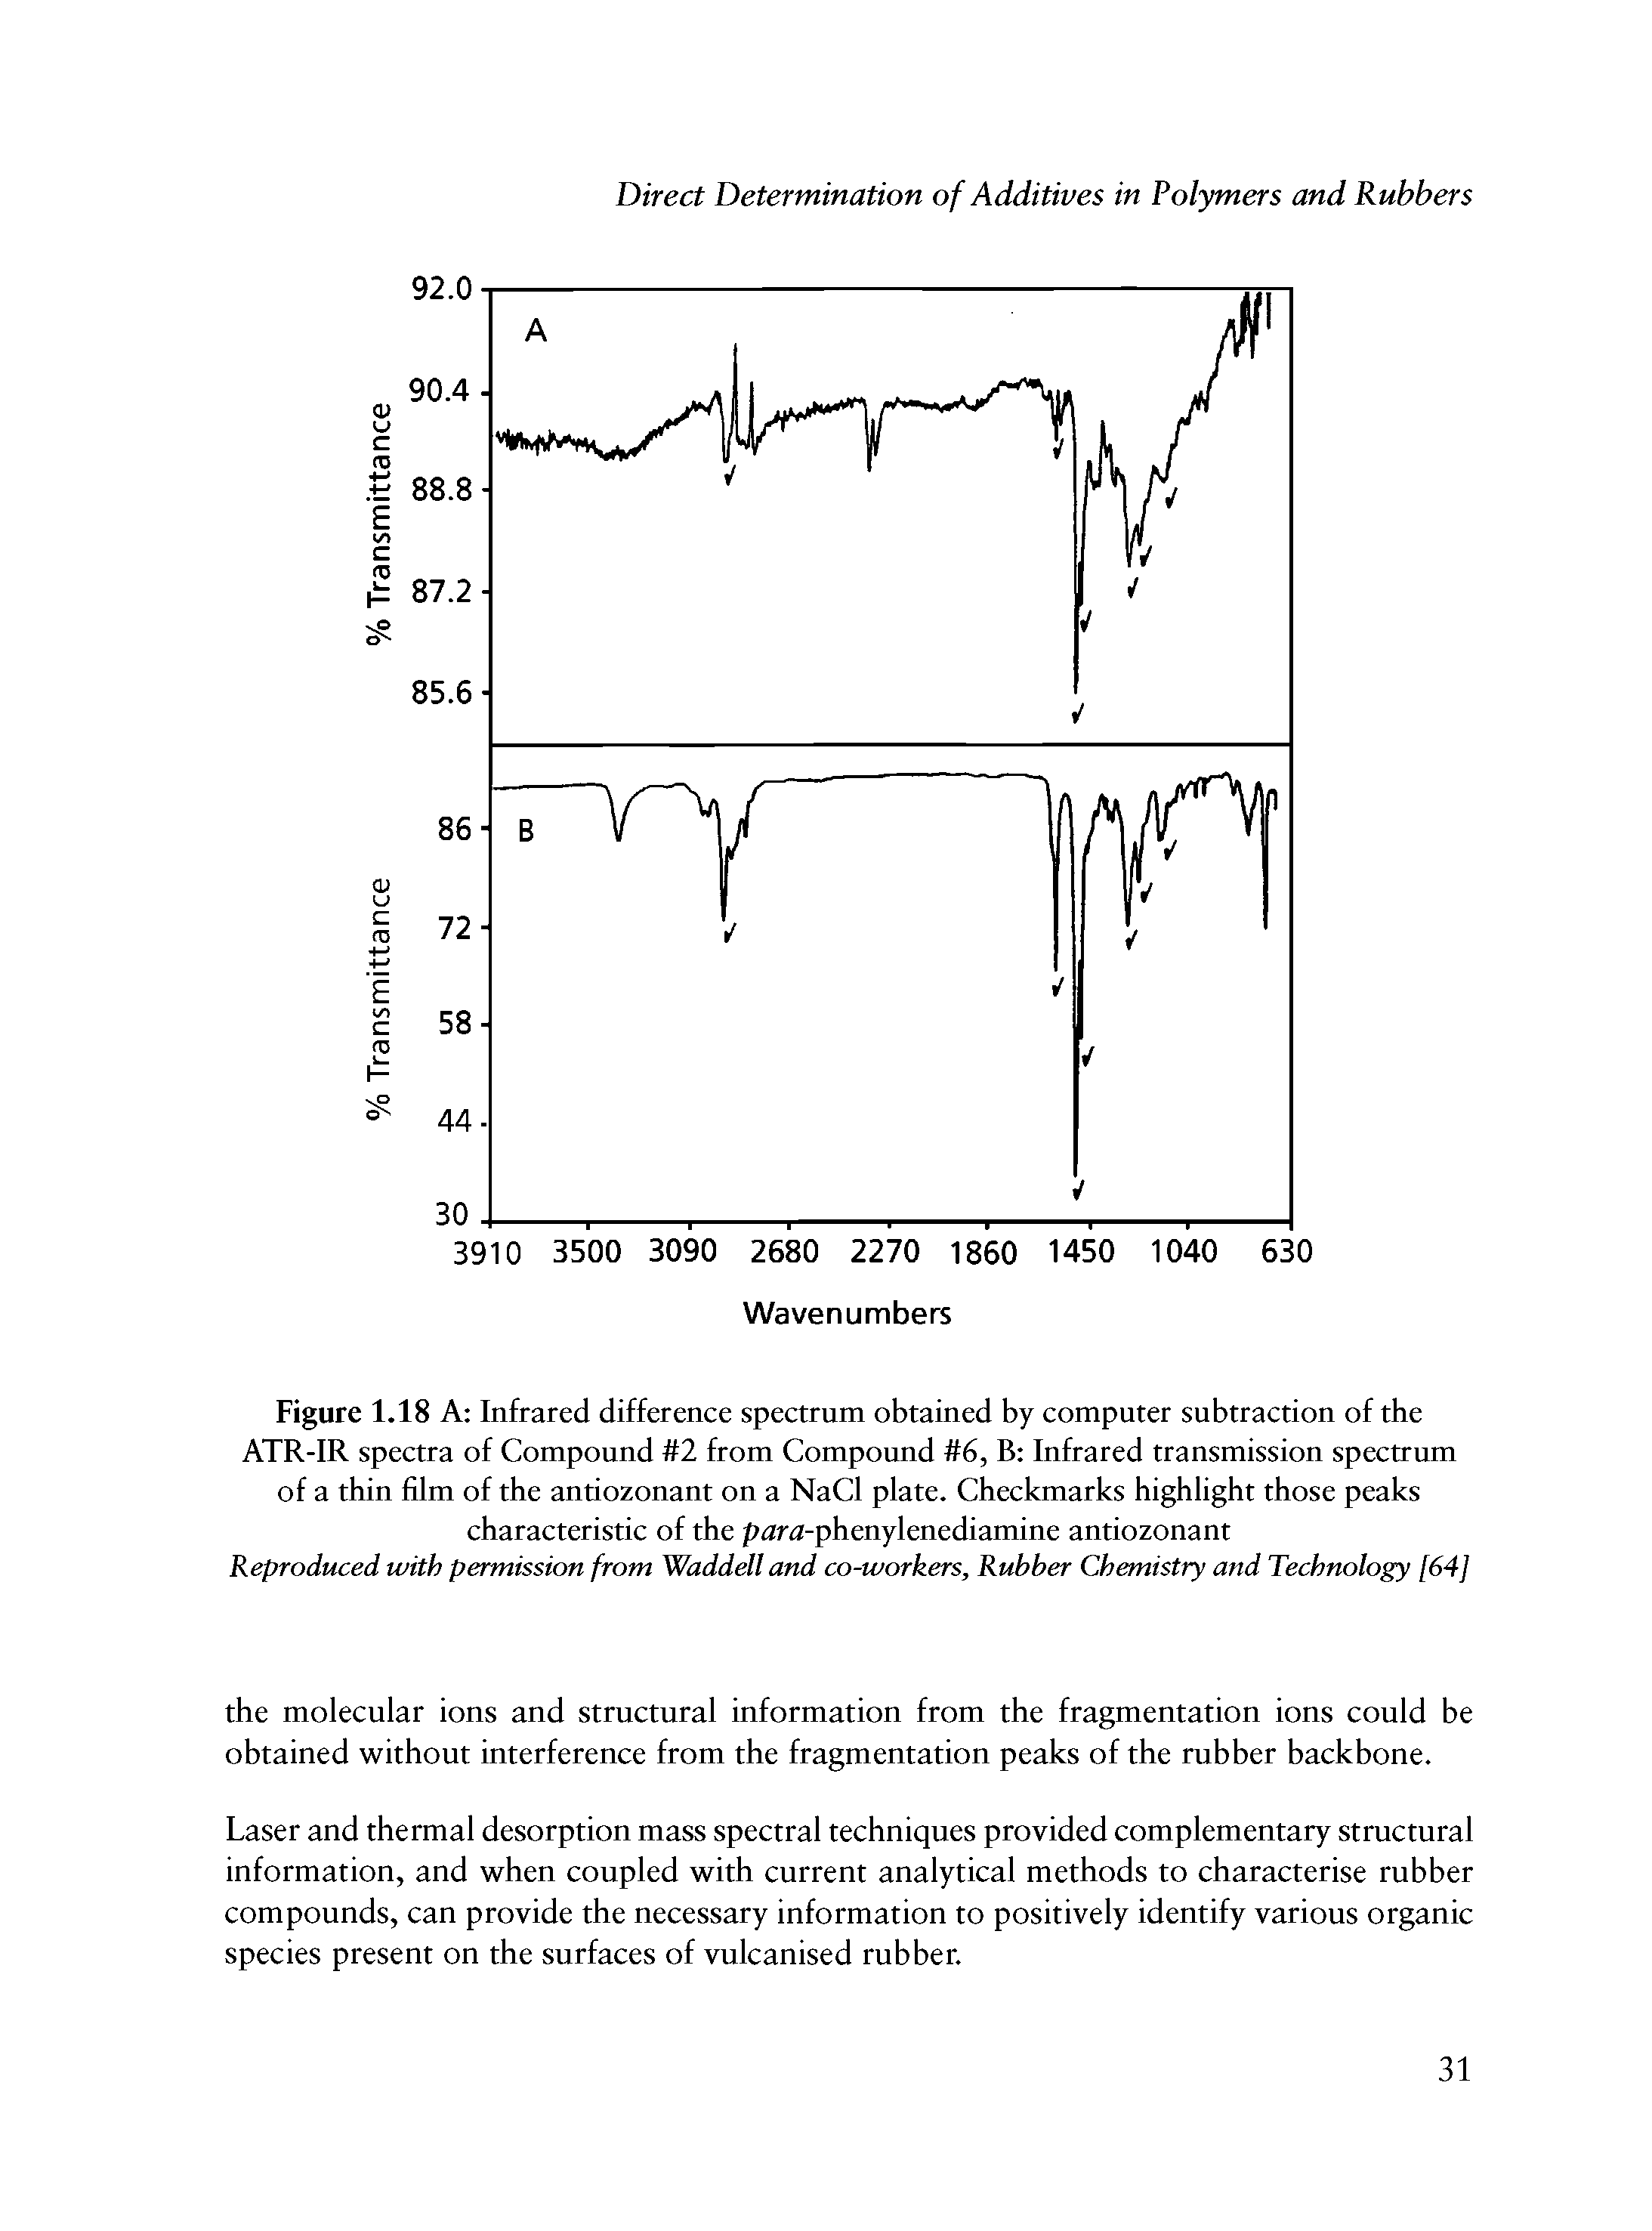 Figure 1.18 A Infrared difference spectrum obtained by computer subtraction of the ATR-IR spectra of Compound 2 from Compound 6, B Infrared transmission spectrum of a thin film of the antiozonant on a NaCl plate. Checkmarks highlight those peaks characteristic of the pitra-phenylenediamine antiozonant Reproduced with permission from Waddell and co-workers. Rubber Chemistry and Technology [64]...